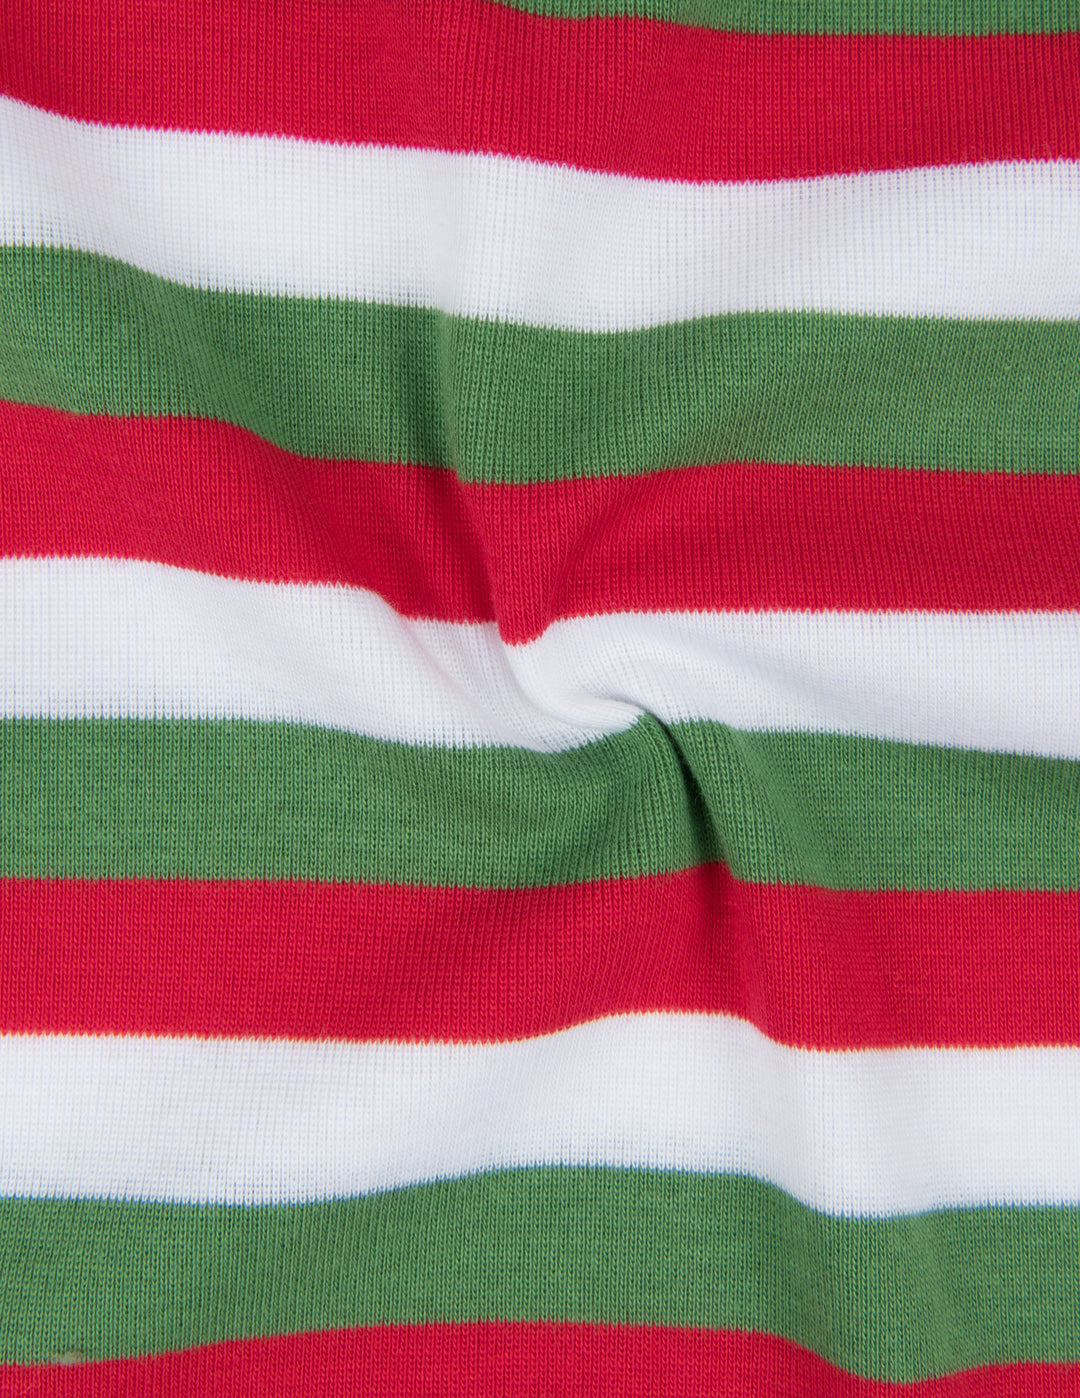 red, white, & green striped swatch